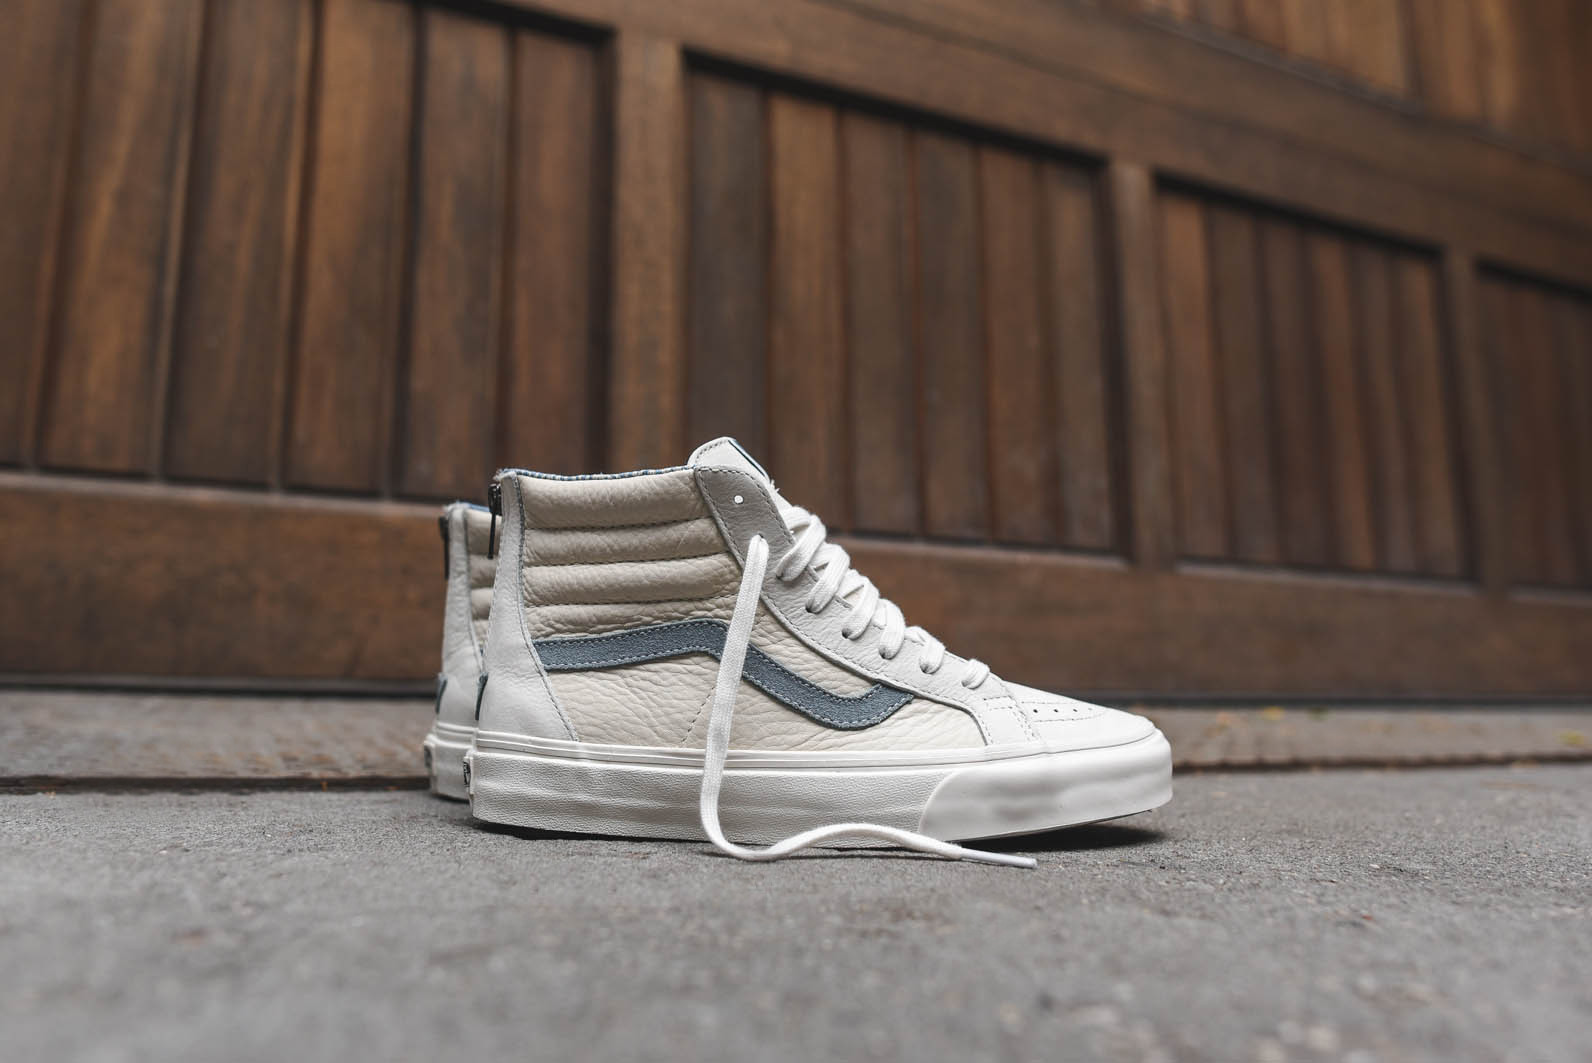 white high top vans with blue stripe